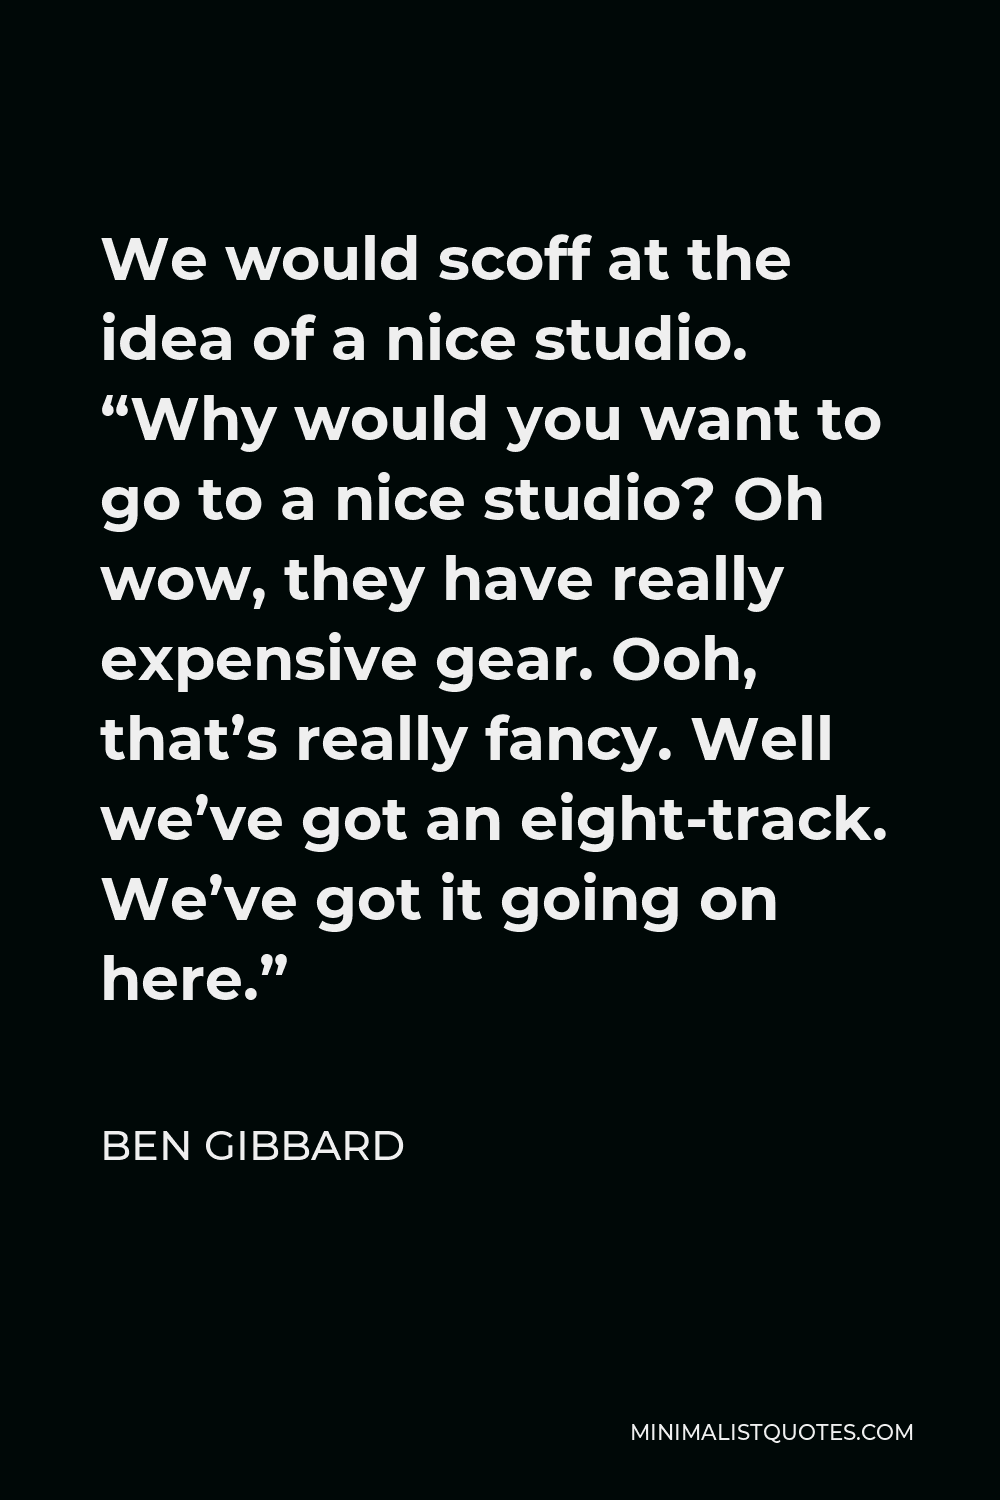 Ben Gibbard Quote - We would scoff at the idea of a nice studio. “Why would you want to go to a nice studio? Oh wow, they have really expensive gear. Ooh, that’s really fancy. Well we’ve got an eight-track. We’ve got it going on here.”